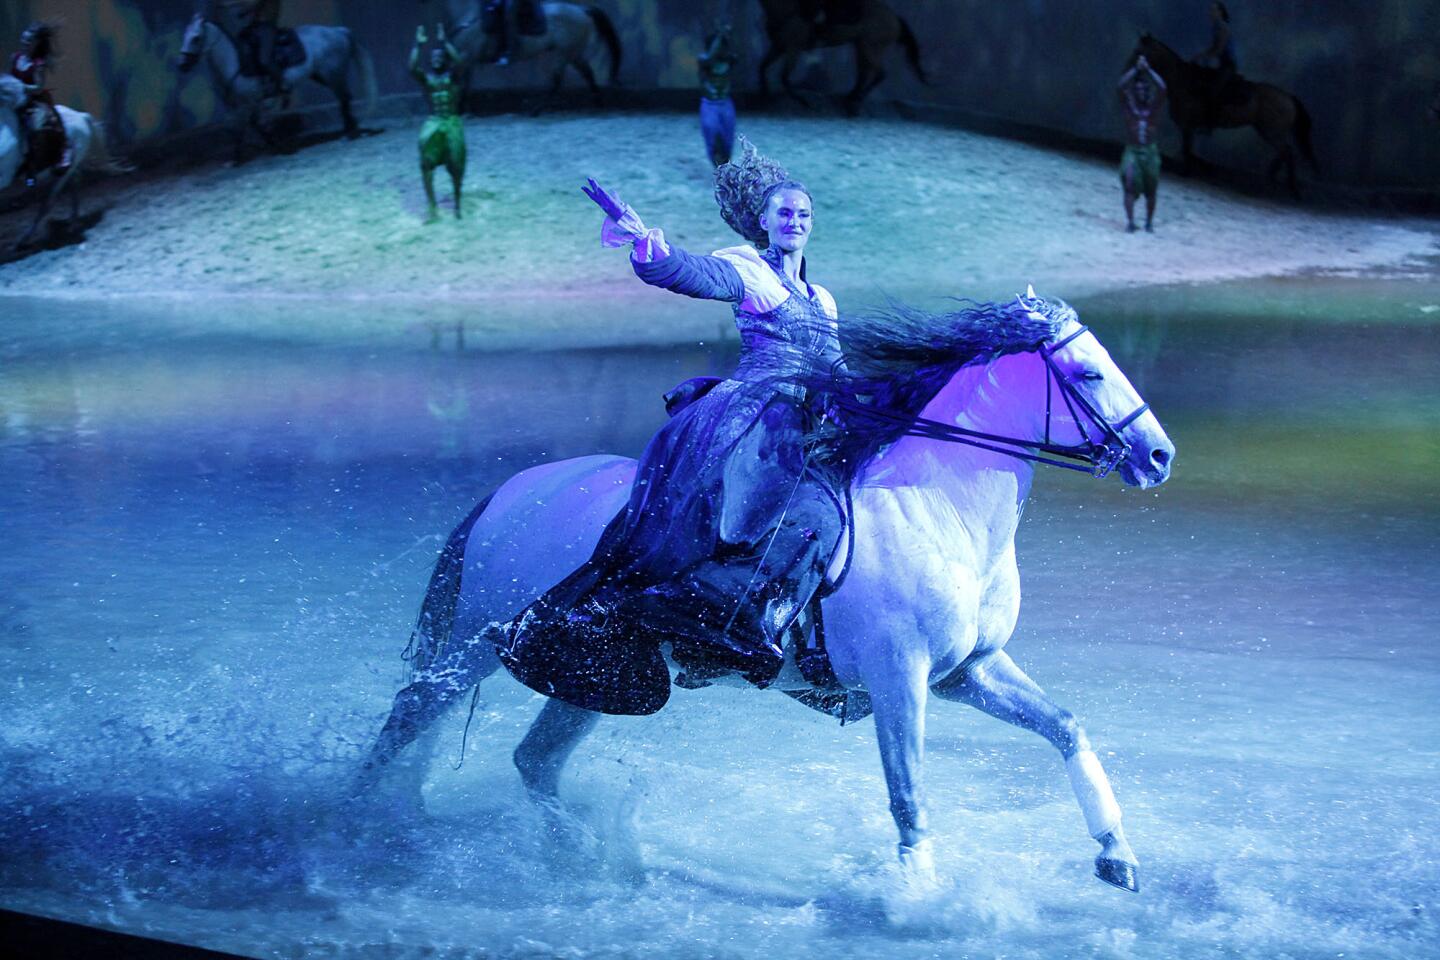 Performer and horse trainer Elise Verdoncq waves goodbuye to the crowds as she and her horse rush through a large pool of water during the Cavalia Odysseo show in Burbank on Tuesday, February 26, 2013. The show, which opened Wednesday, Feb. 27, features equestrians and acrobats.